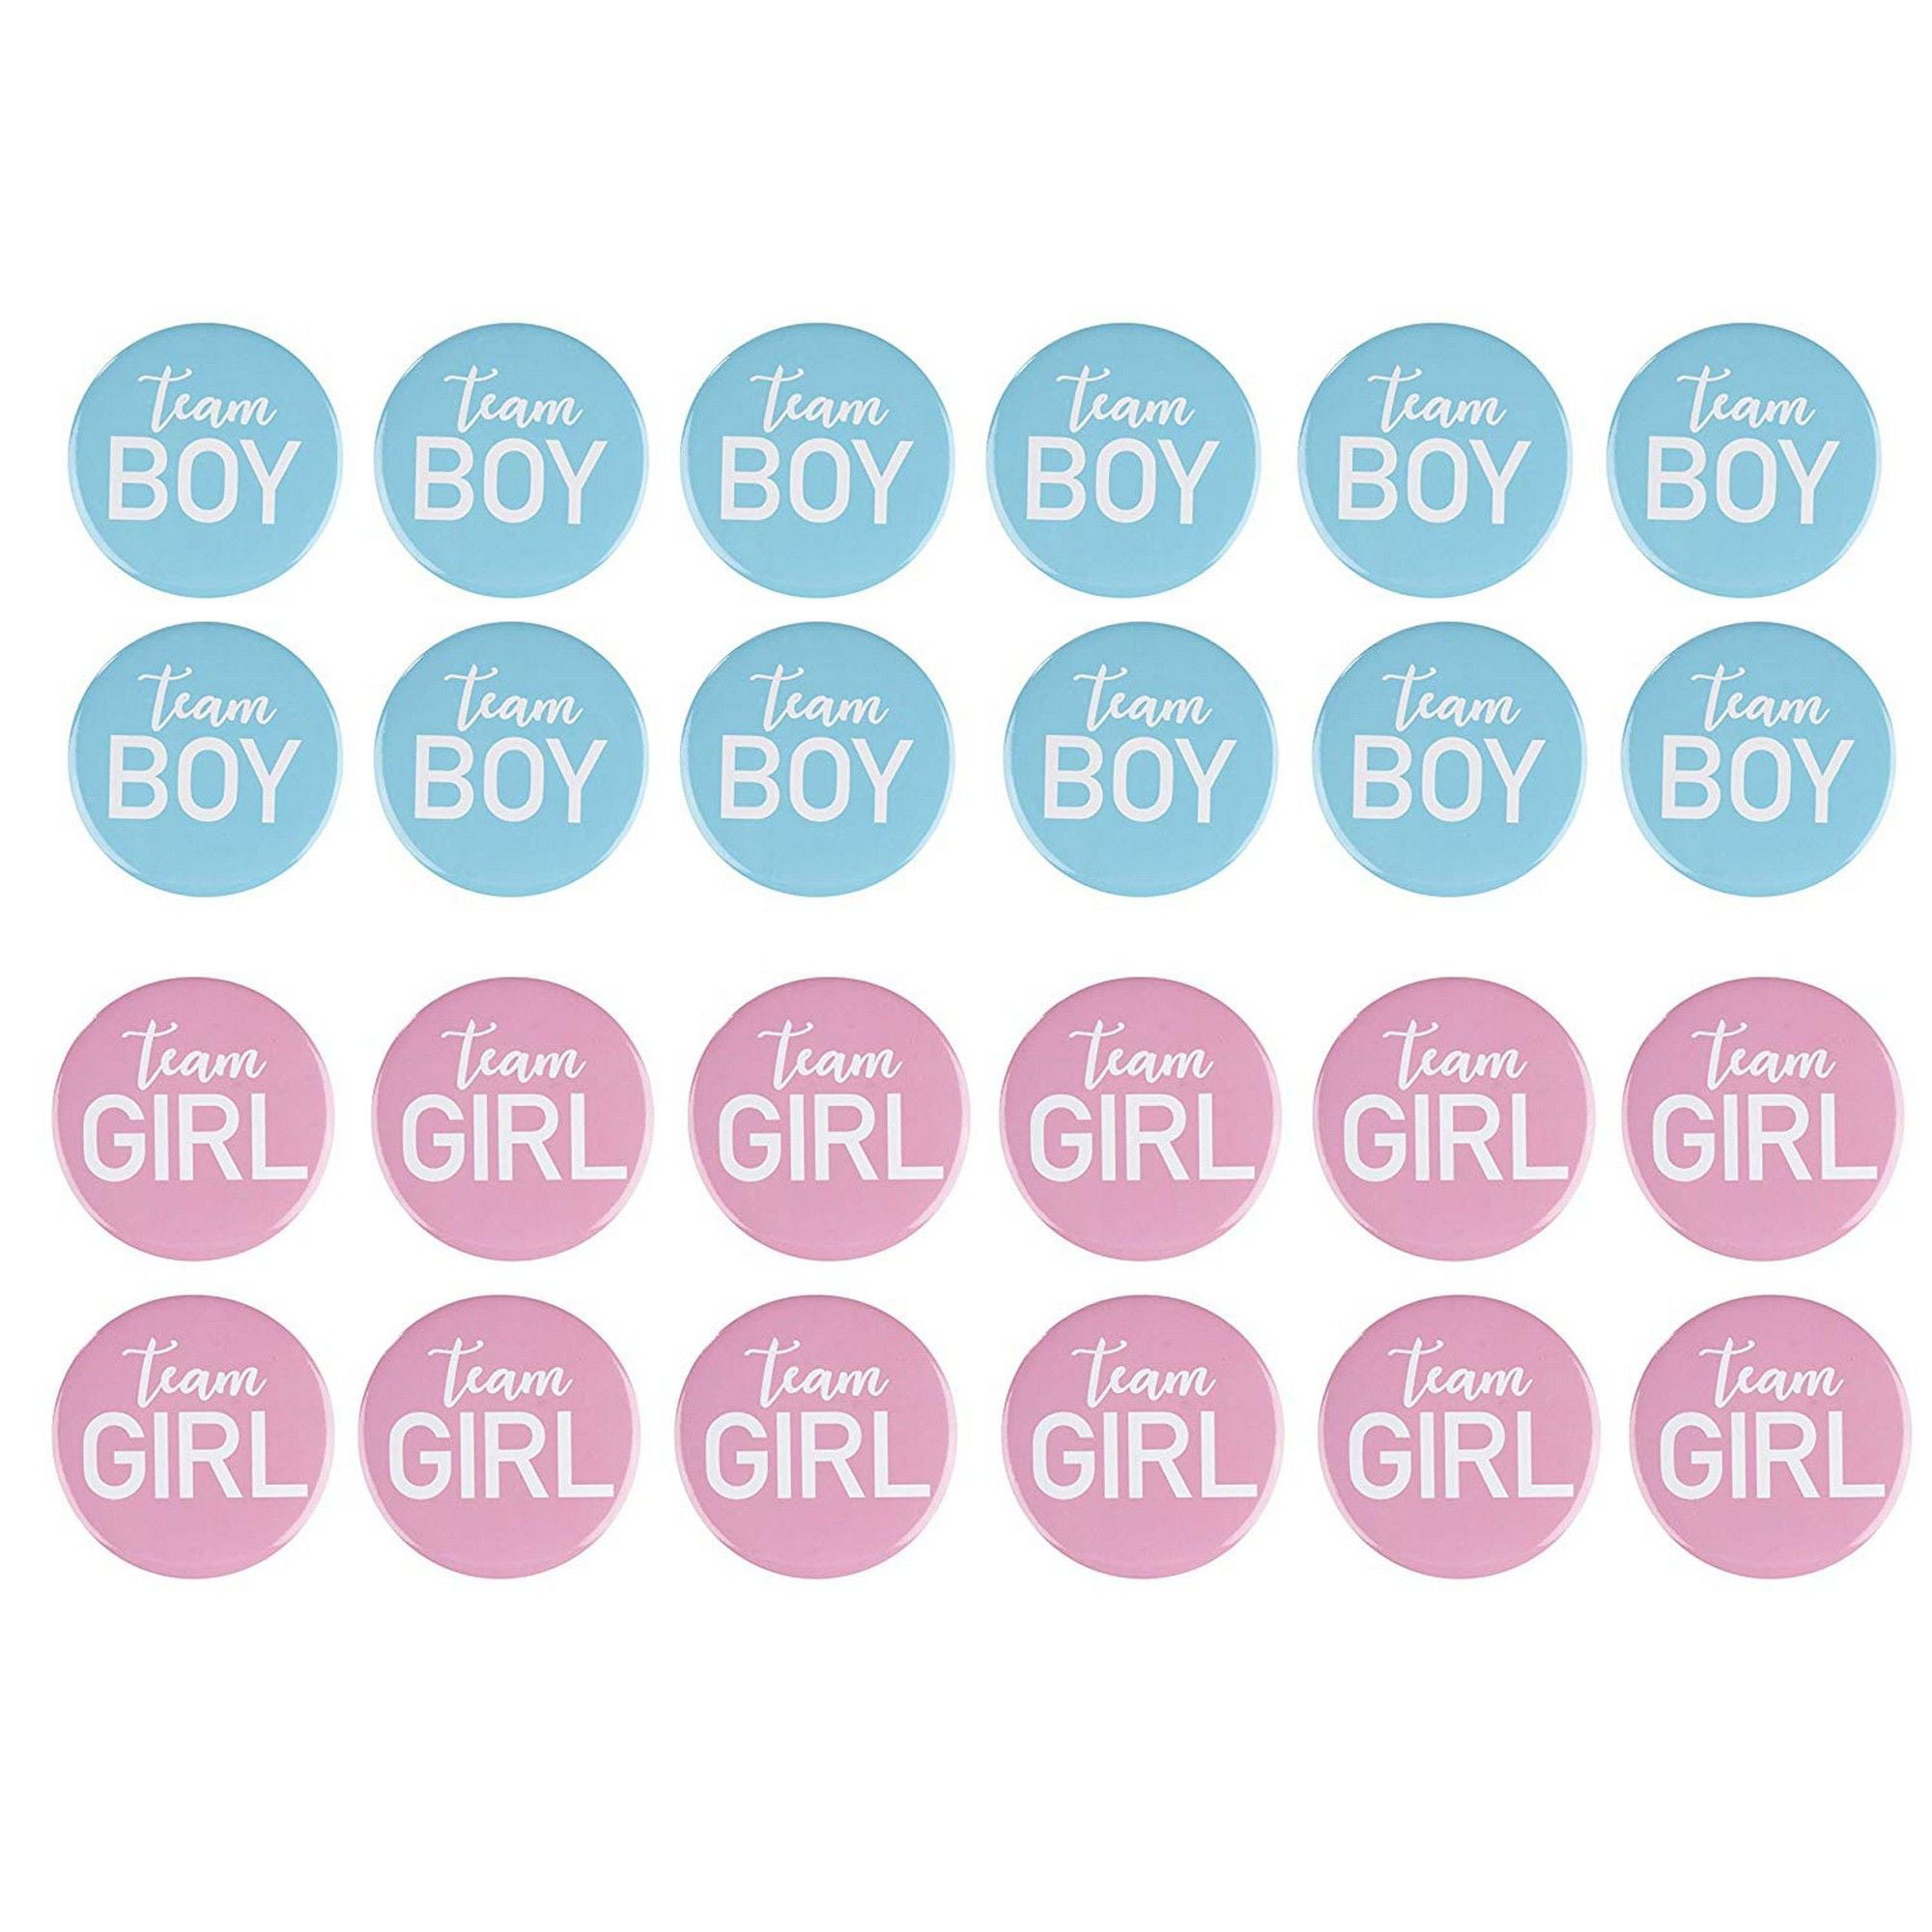 Gender Reveal Baby Shower Team Boy Baby Party It/'s A Boy T-Shirt